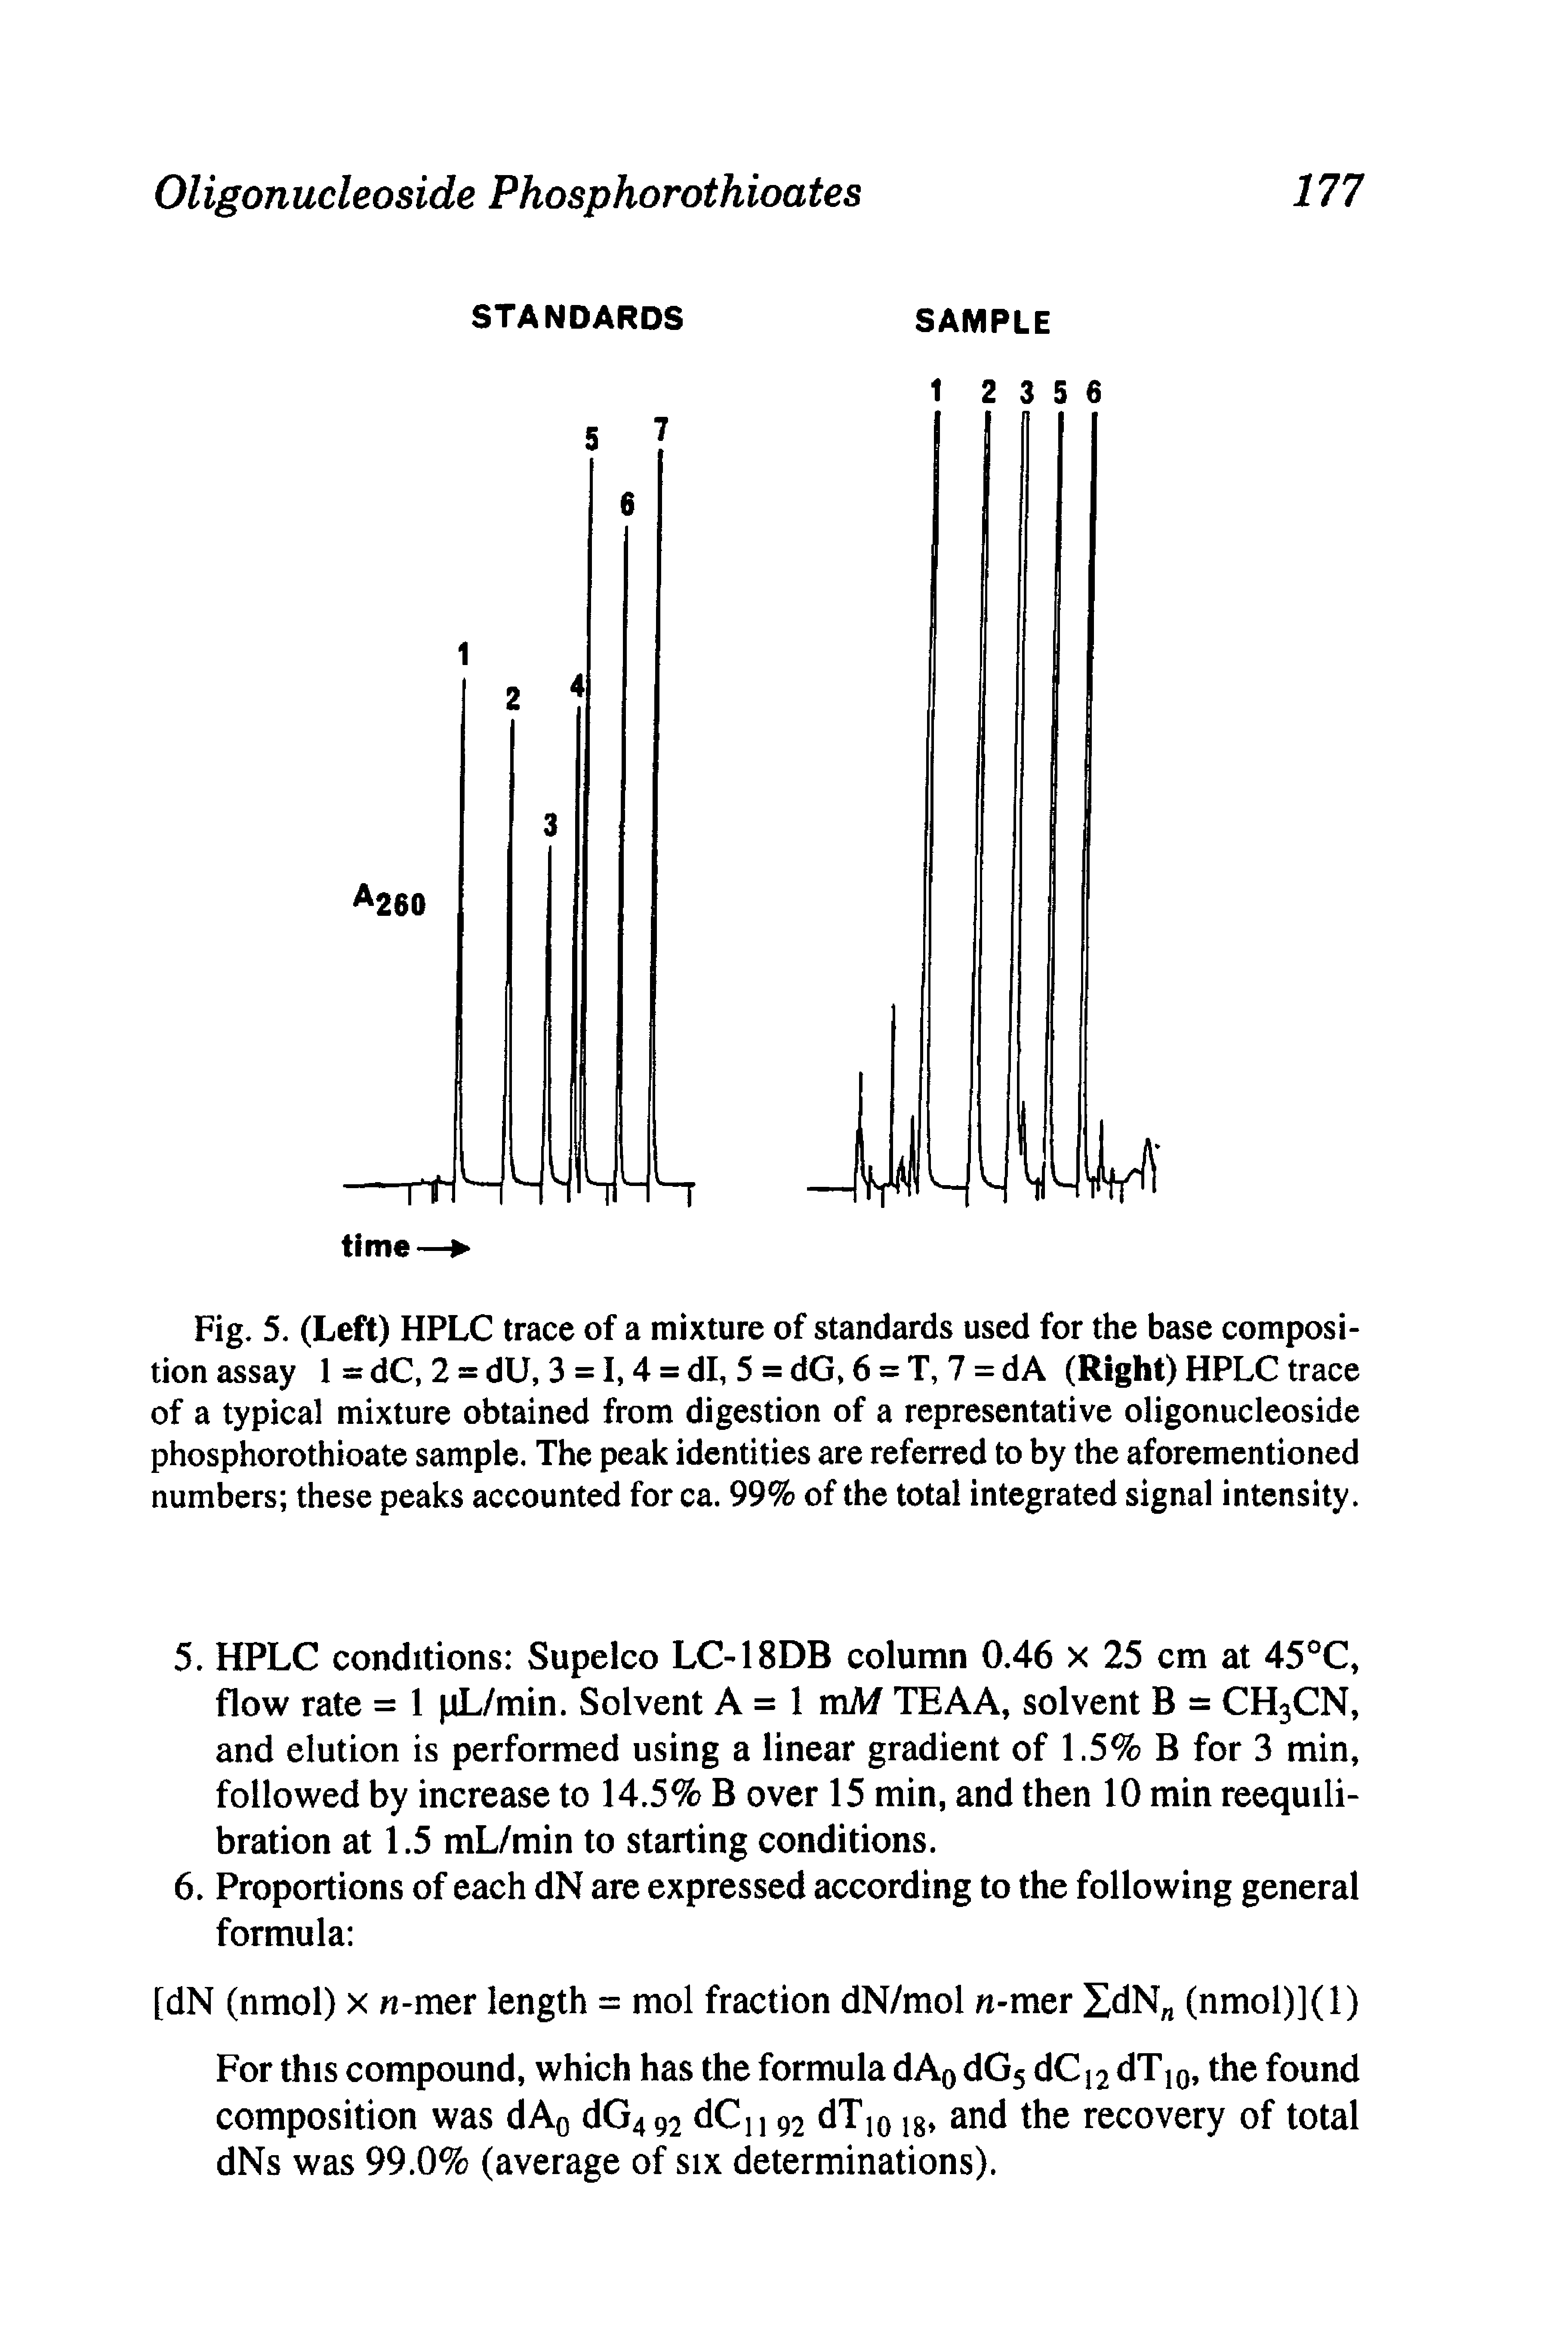 Fig. 5. (Left) HPLC trace of a mixture of standards used for the base composition assay 1 = dC. 2 = dU. 3 = 1,4 = dl, 5 = dG, 6 = T, 7 = dA (Right) HPLC trace of a typical mixture obtained from digestion of a representative oligonucleoside phosphorothioate sample. The peak identities are referred to by the aforementioned numbers these peaks accounted for ca. 99% of the total integrated signal intensity.